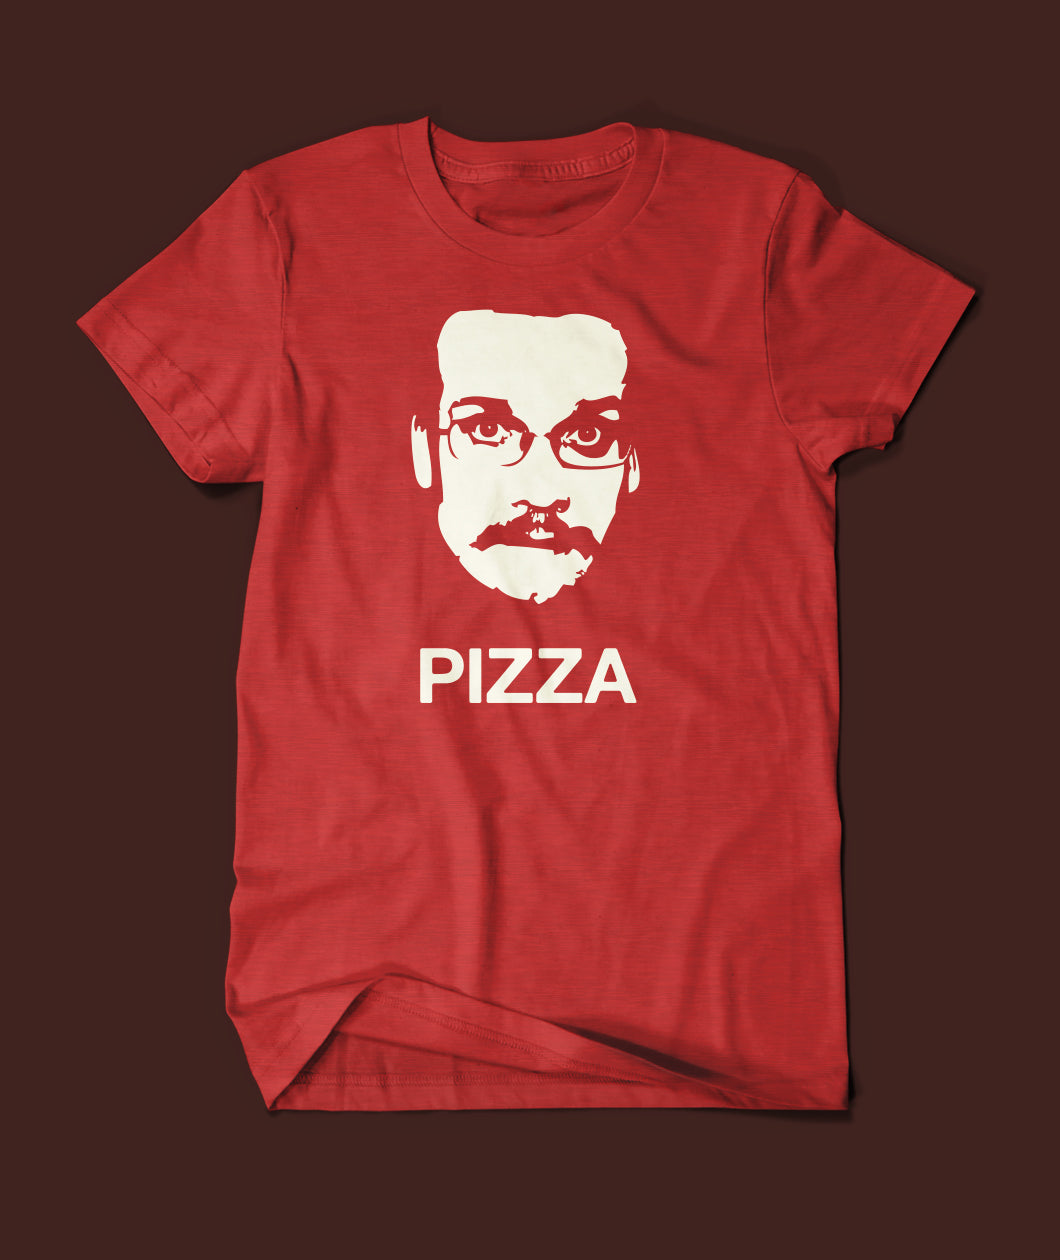 The original Pizza John shirt is a bright red shirt with the classic Pizza John head with the word "Pizza" below it in white. 